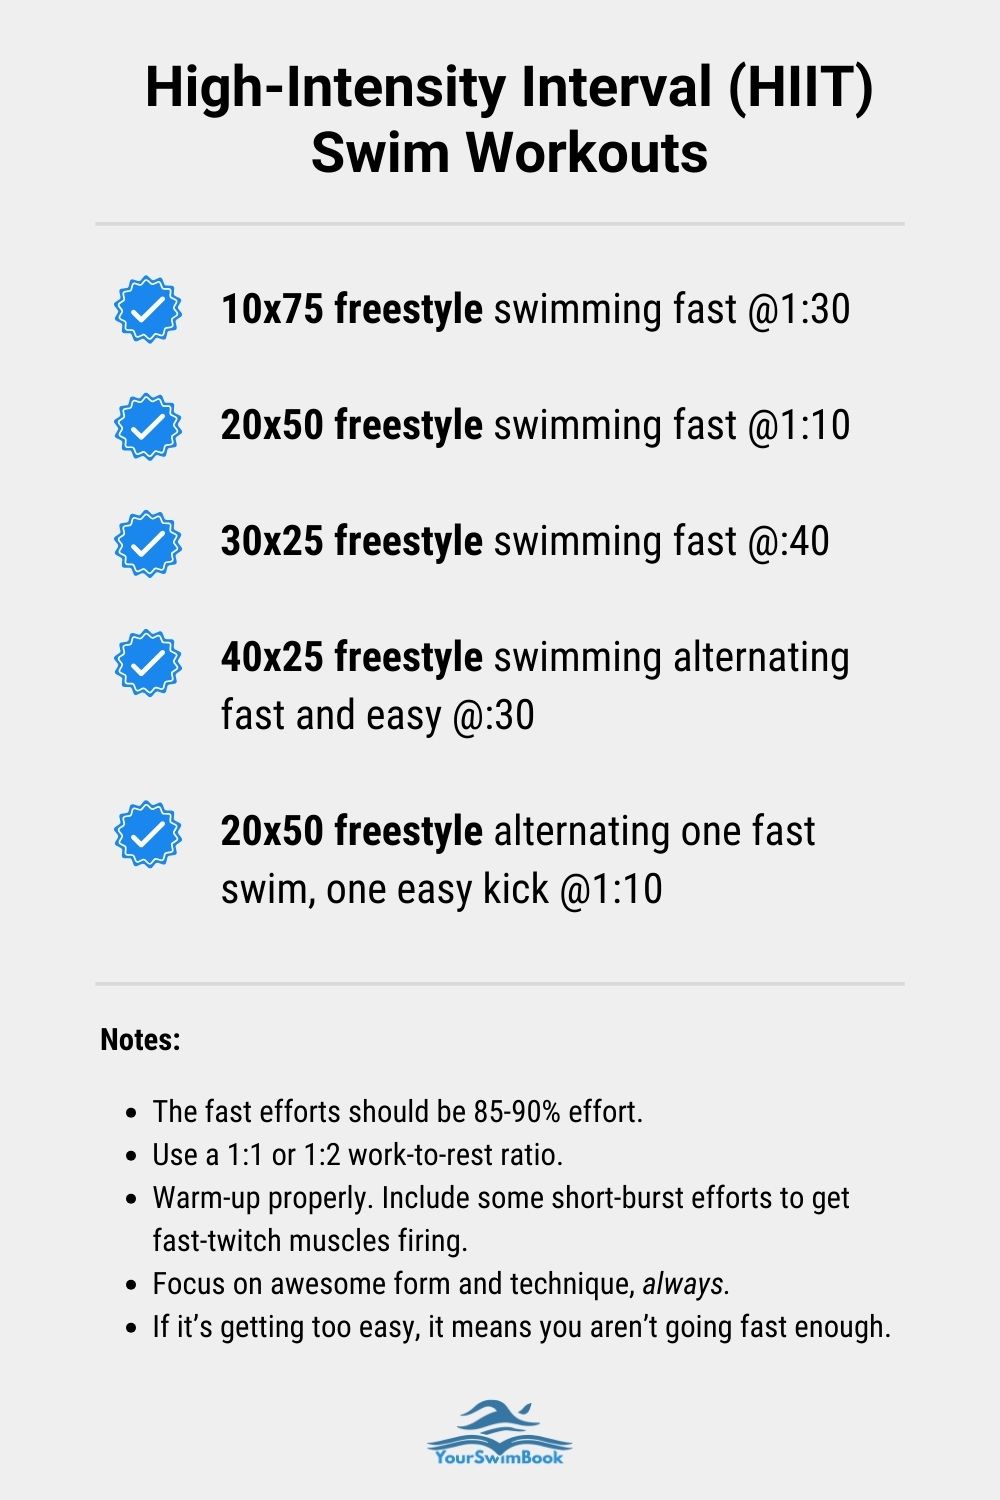 High Intensity Interval (HIIT) Swimming Workouts